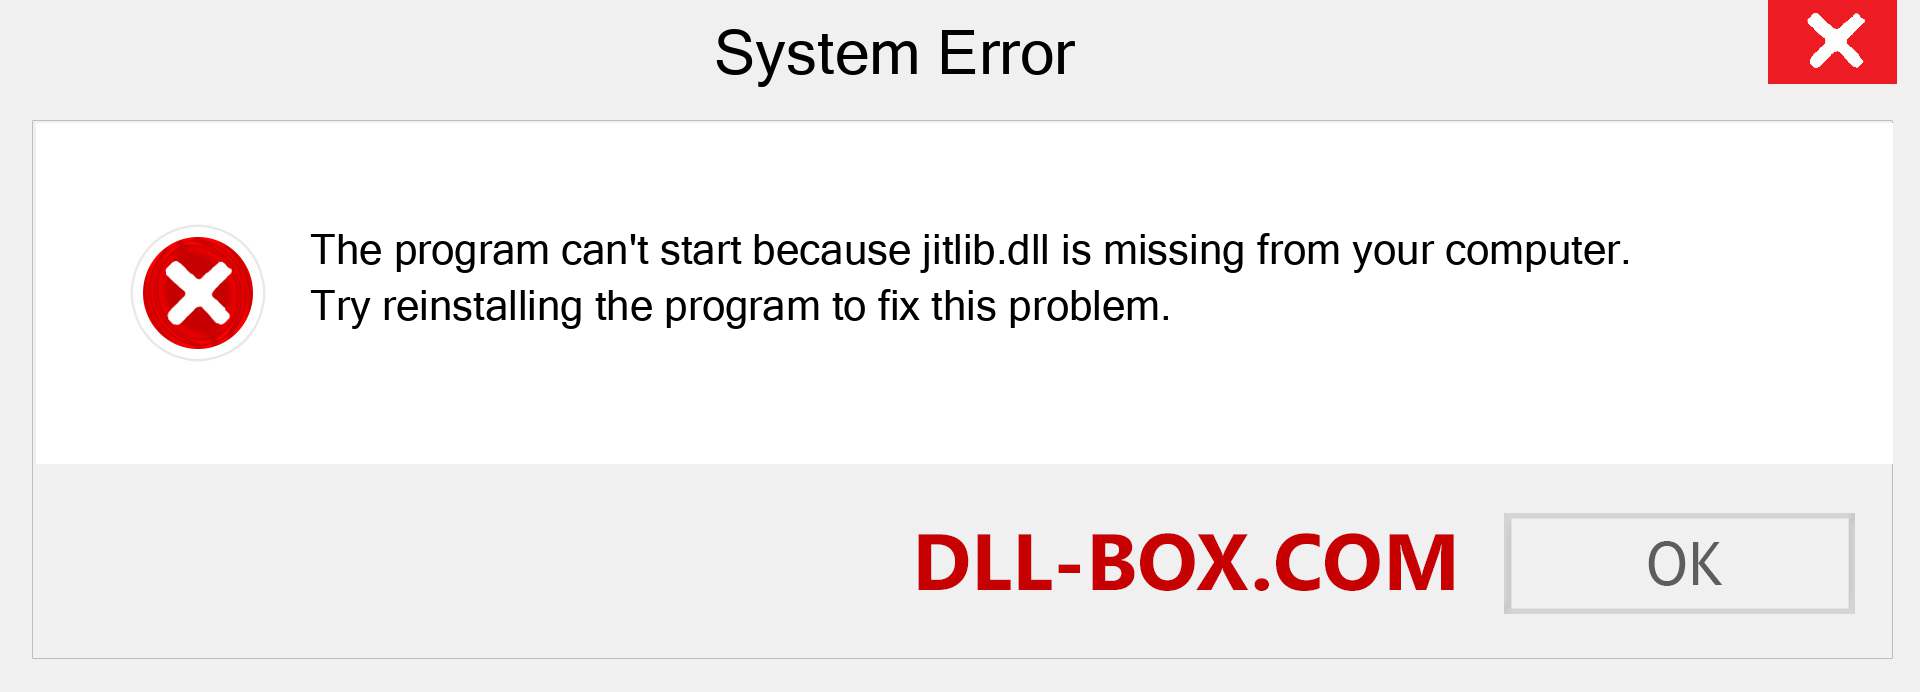  jitlib.dll file is missing?. Download for Windows 7, 8, 10 - Fix  jitlib dll Missing Error on Windows, photos, images